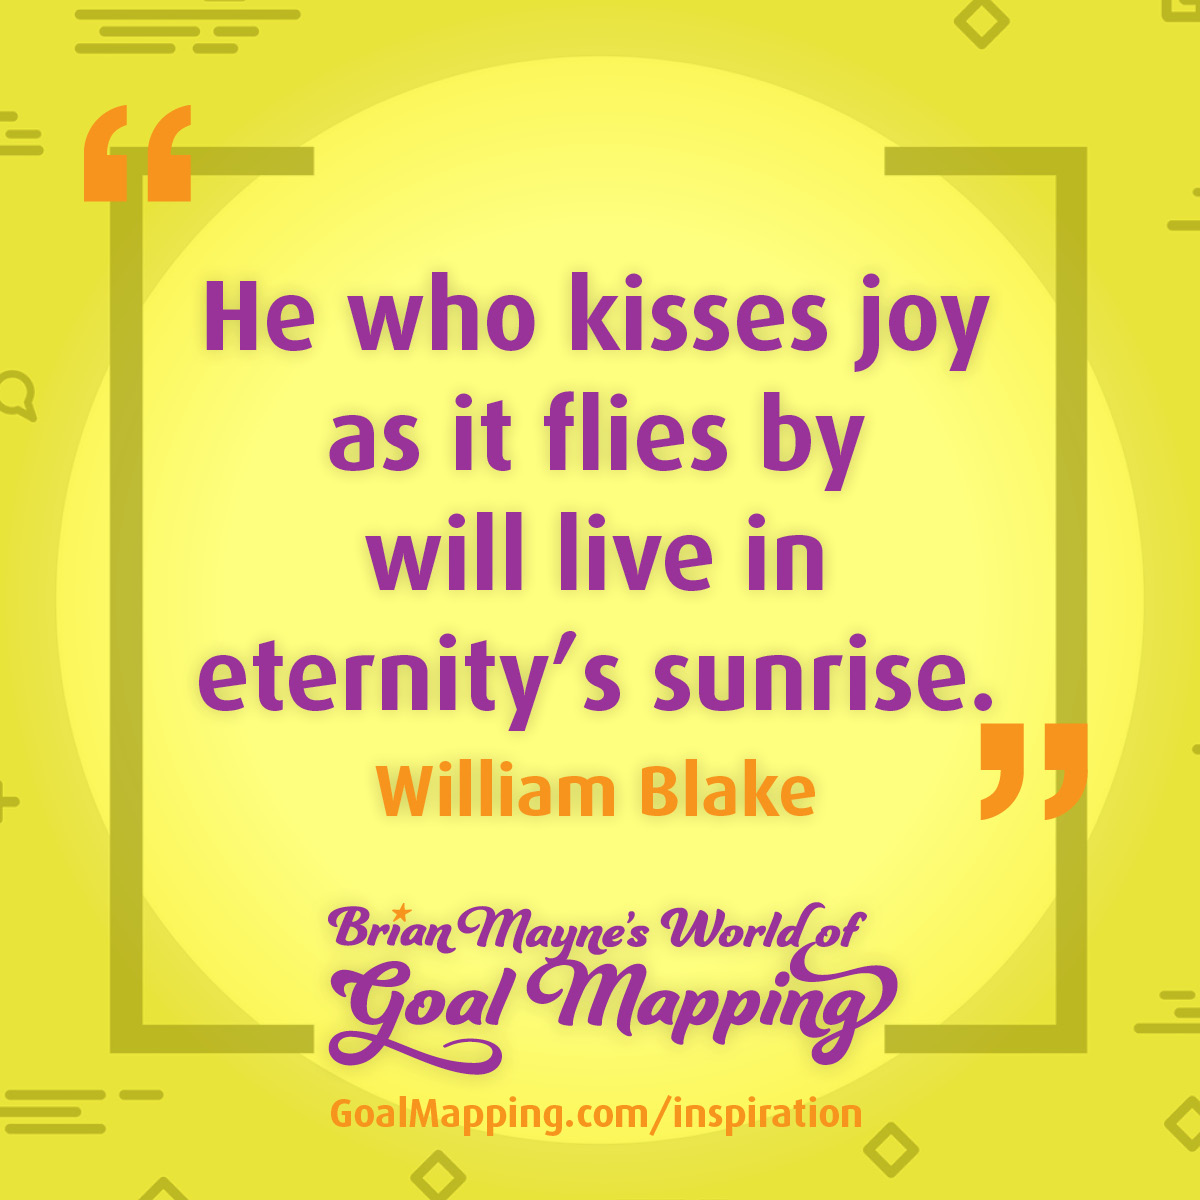 "He who kisses joy as it flies by will live in eternity’s sunrise." William Blake